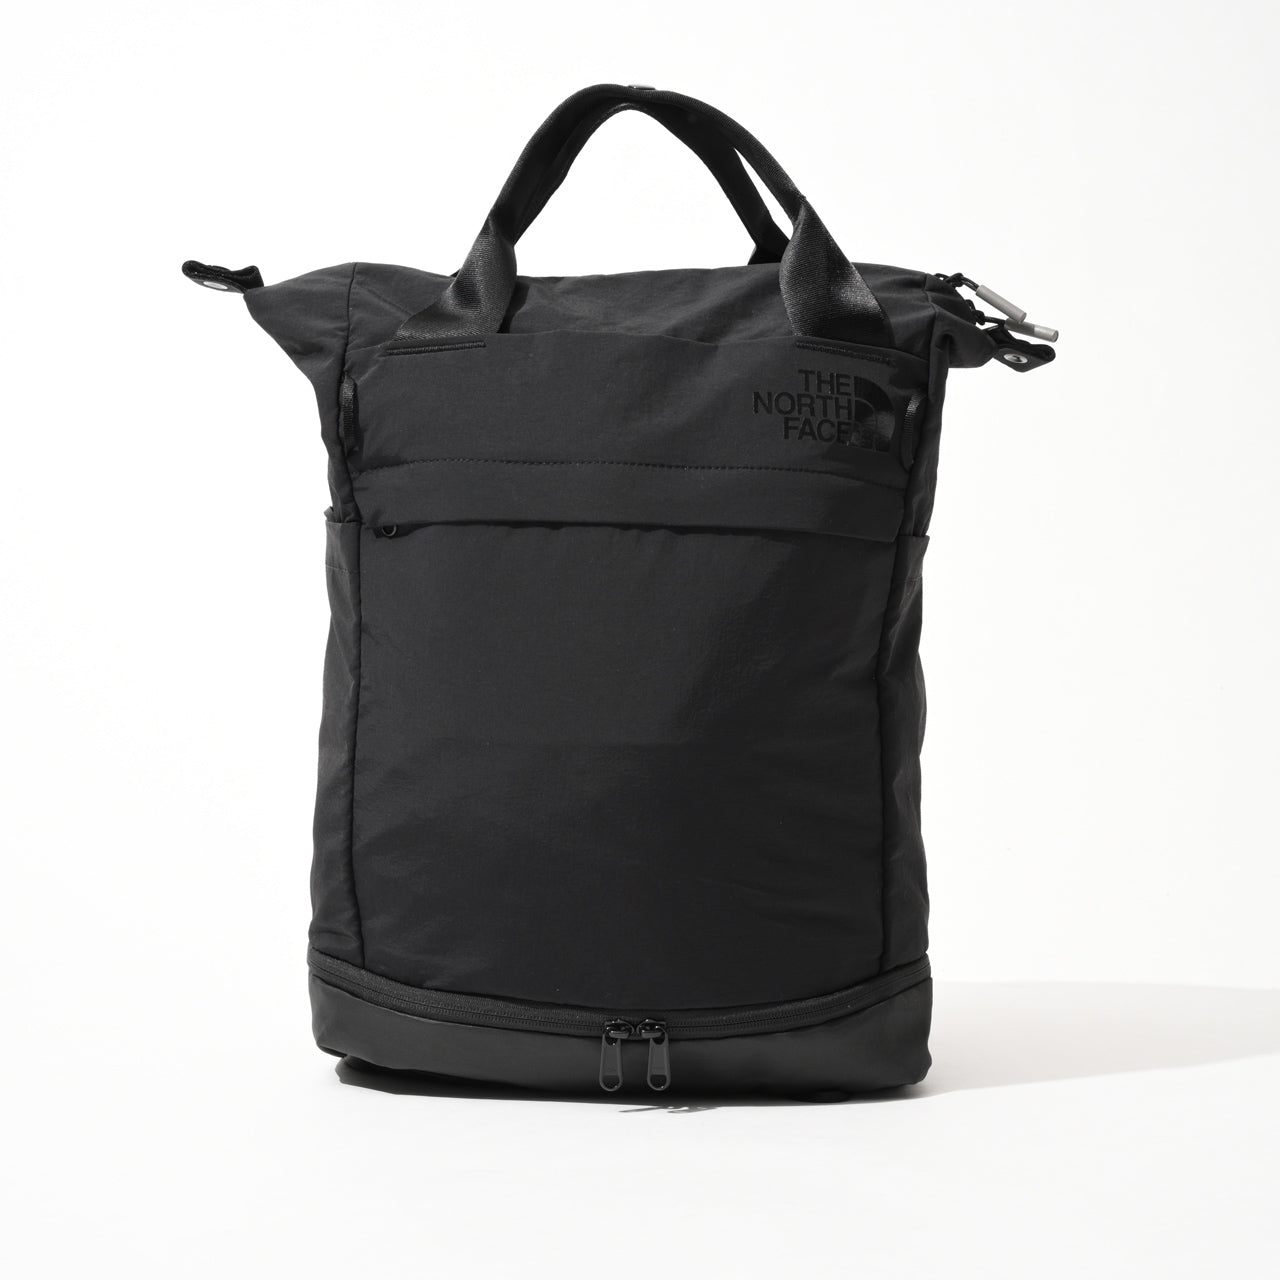 THE NORTH FACE ノースフェイス ネバーストップ ユーティリティ バッグ W Never Stop Utility Pack 23L デイパック バックパック リュックサック NMW82352【送料無料】